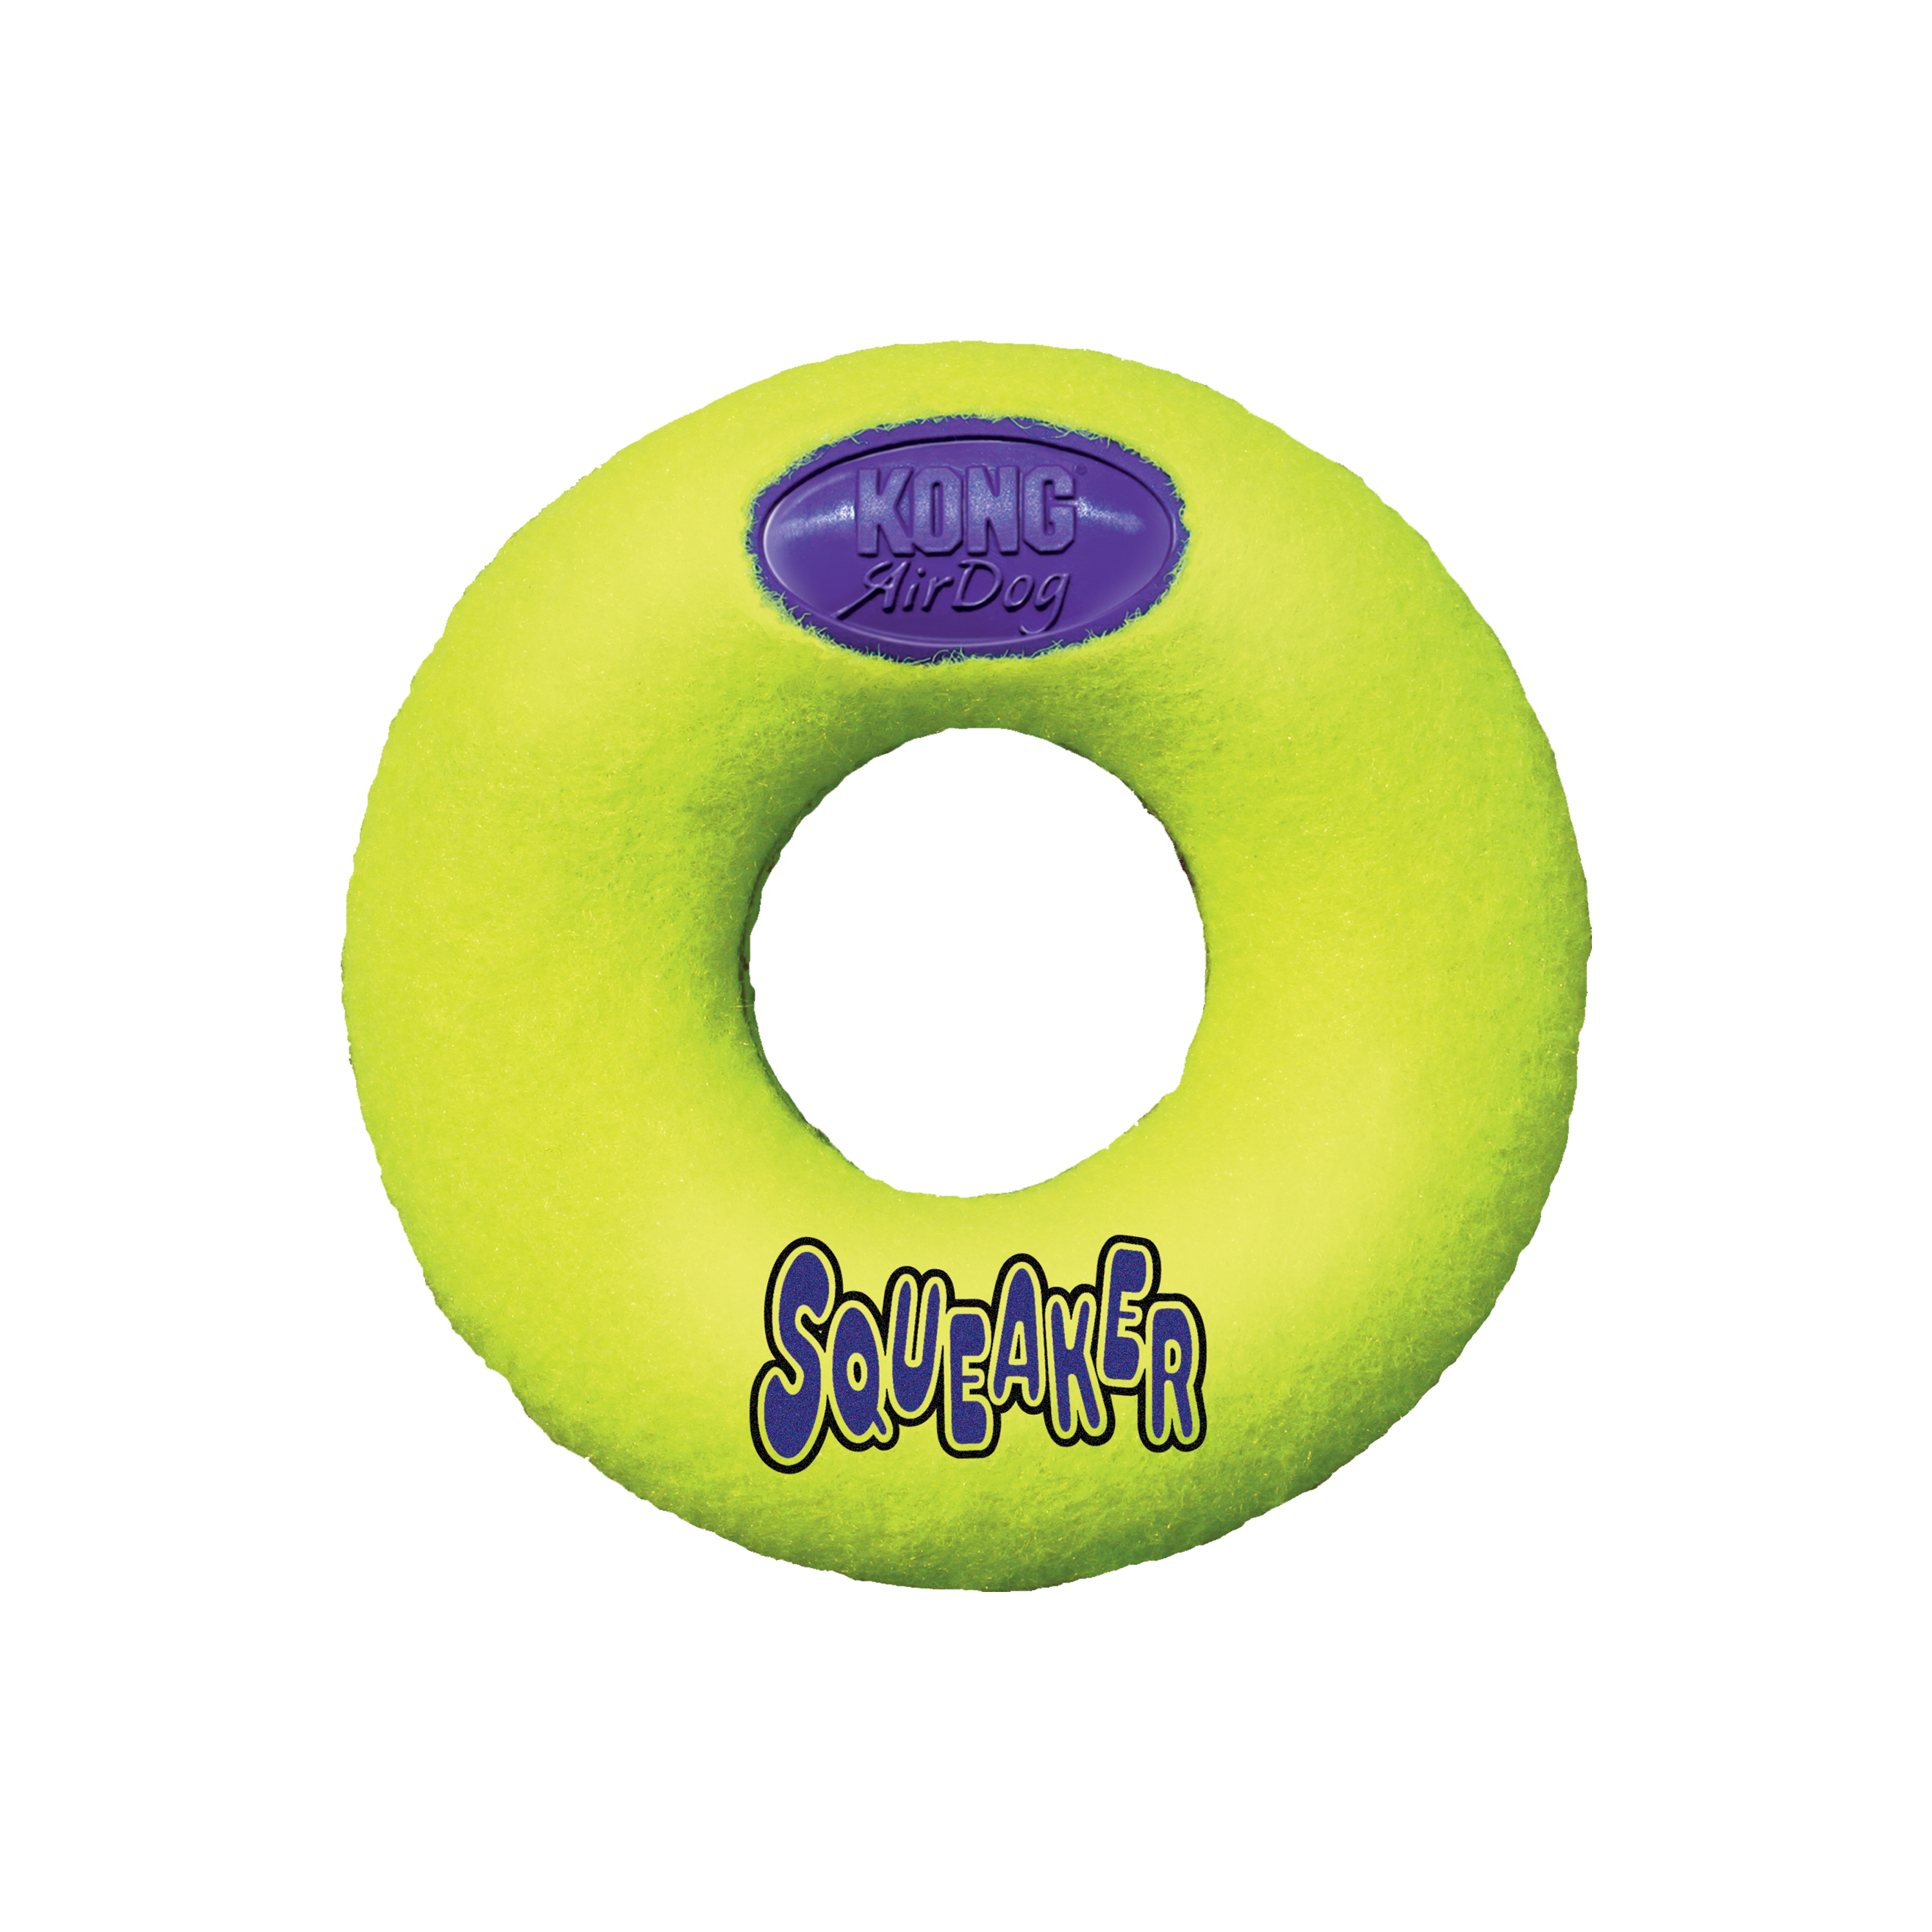 AirDog Squeaker Donut offpack product image